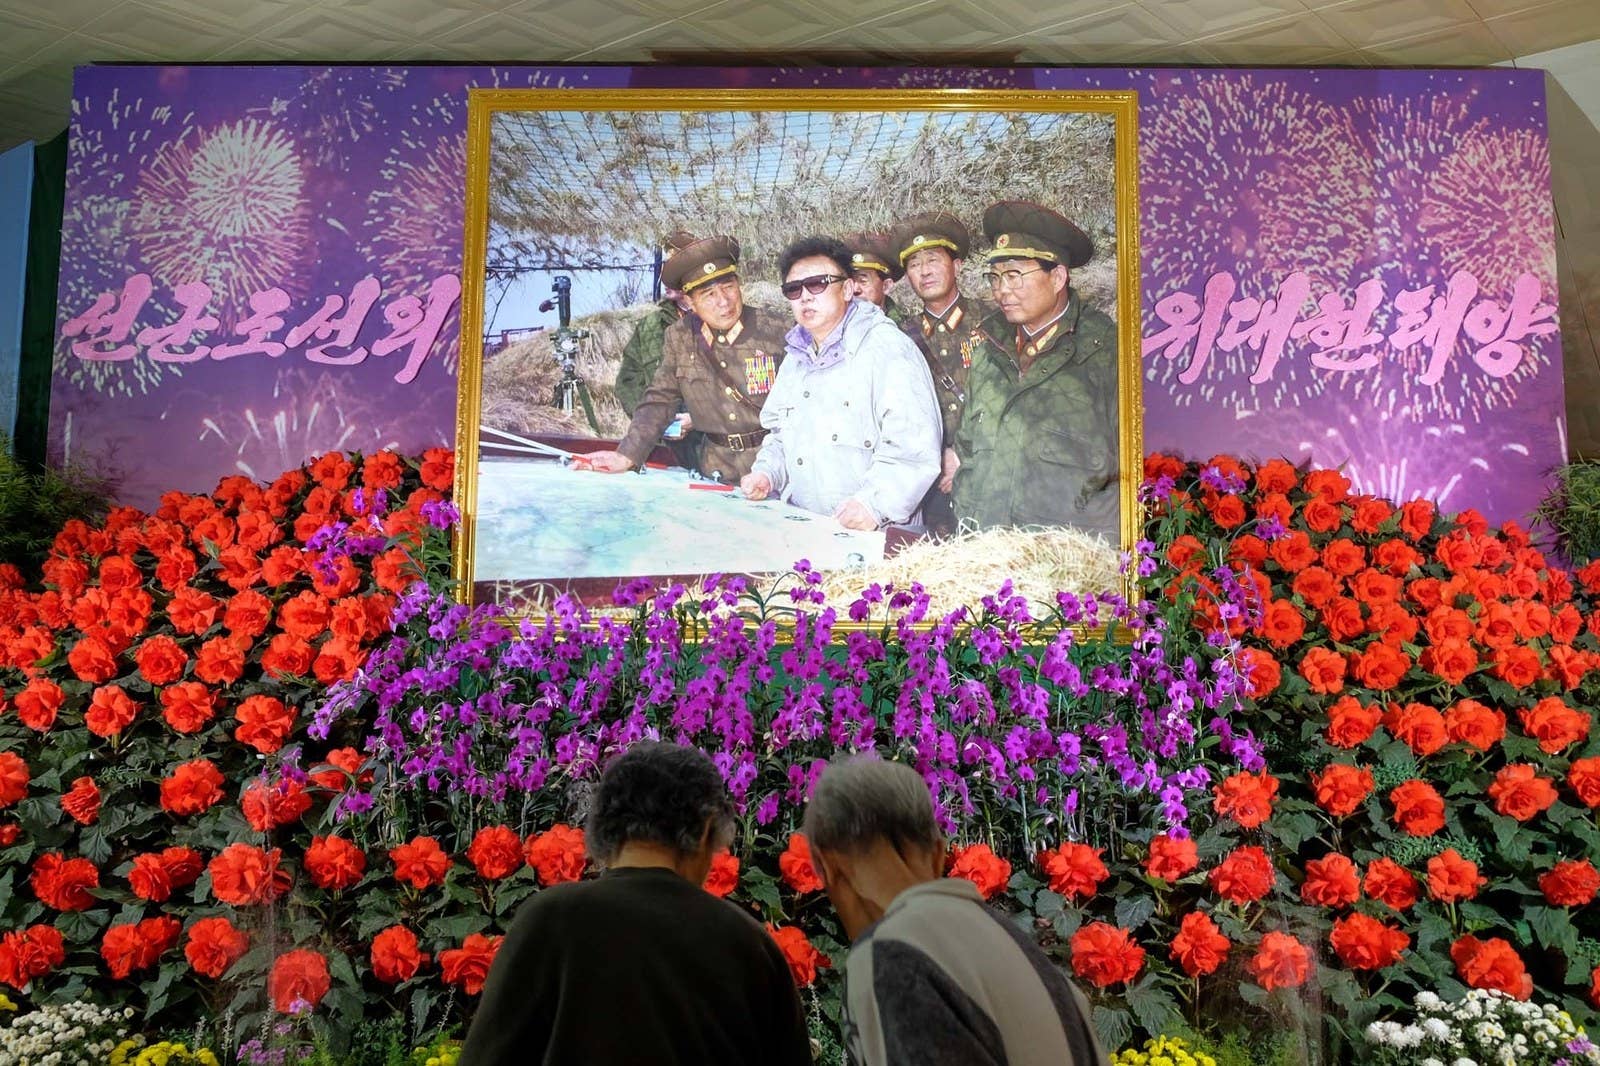 Locals admire Kimjongilia (red) and Kimilsungia (purple) flowers at a flower festival in Pyongyang.